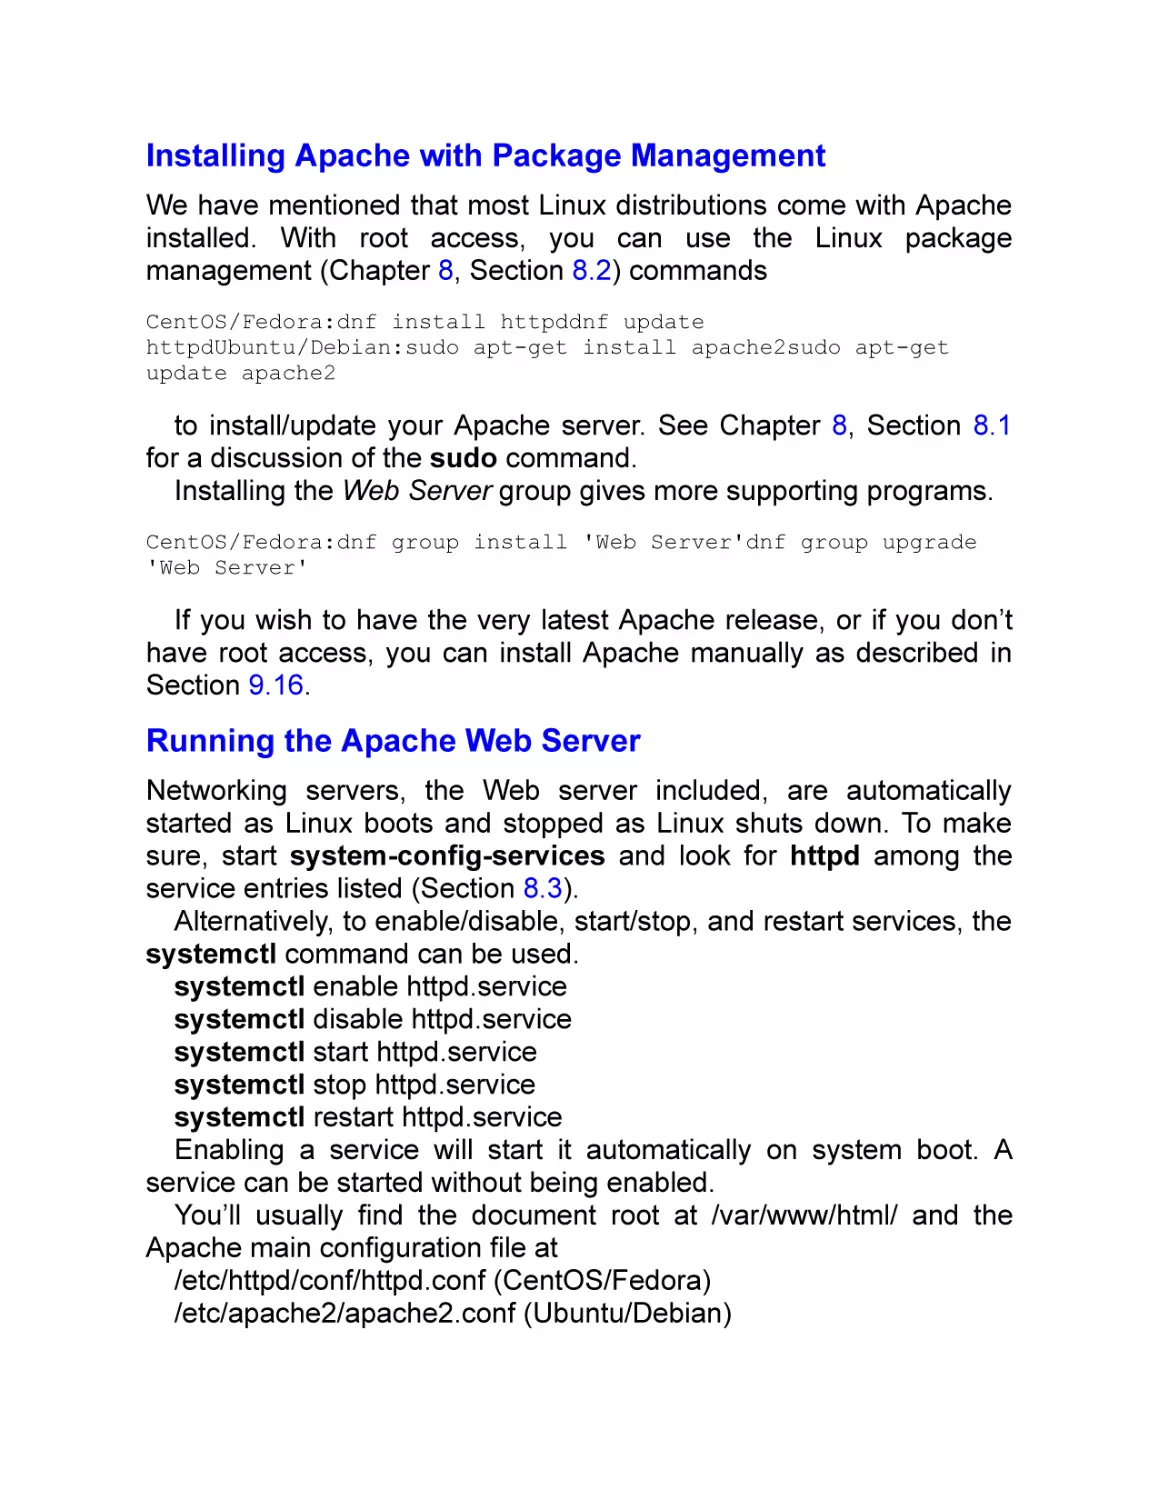 Installing Apache with Package Management
Running the Apache Web Server